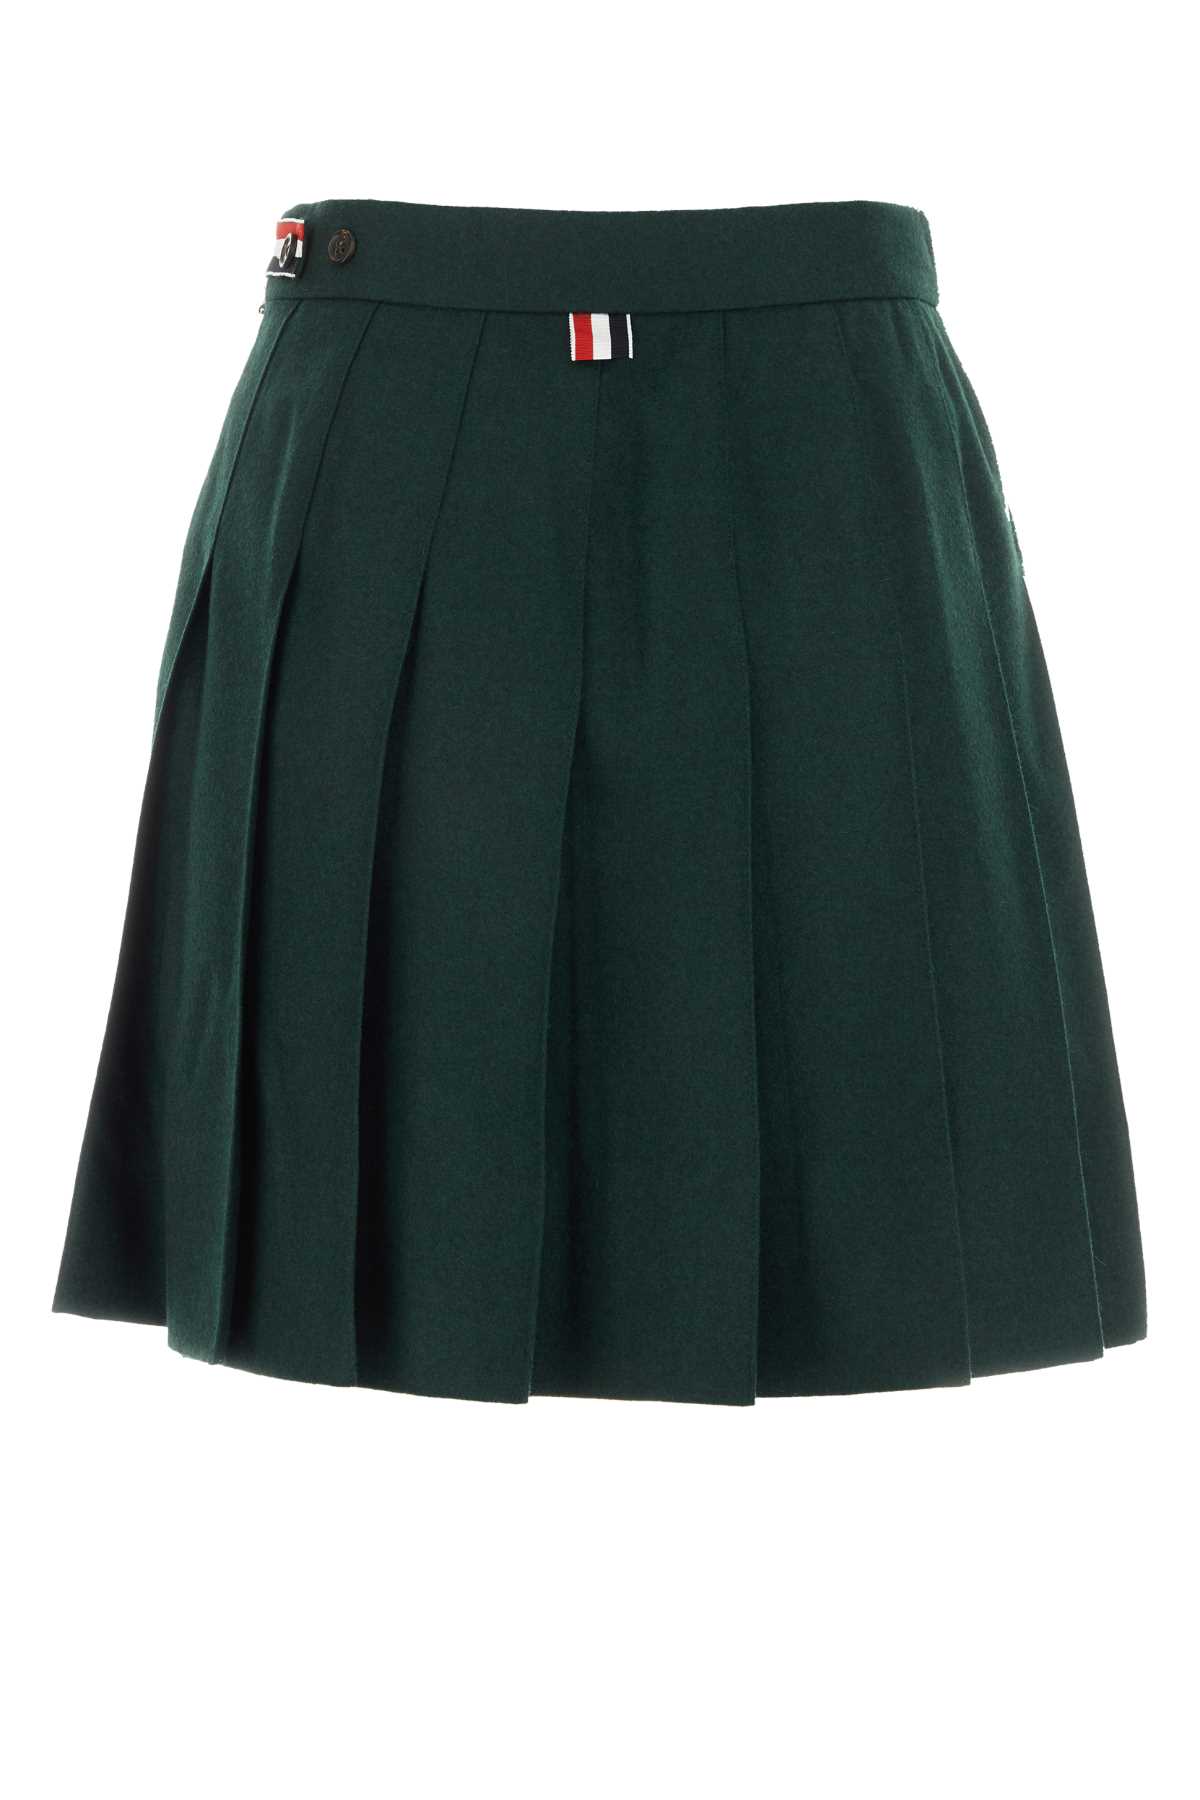 THOM BROWNE BOTTLE GREEN WOOL AND POLYESTER MINI SKIRT